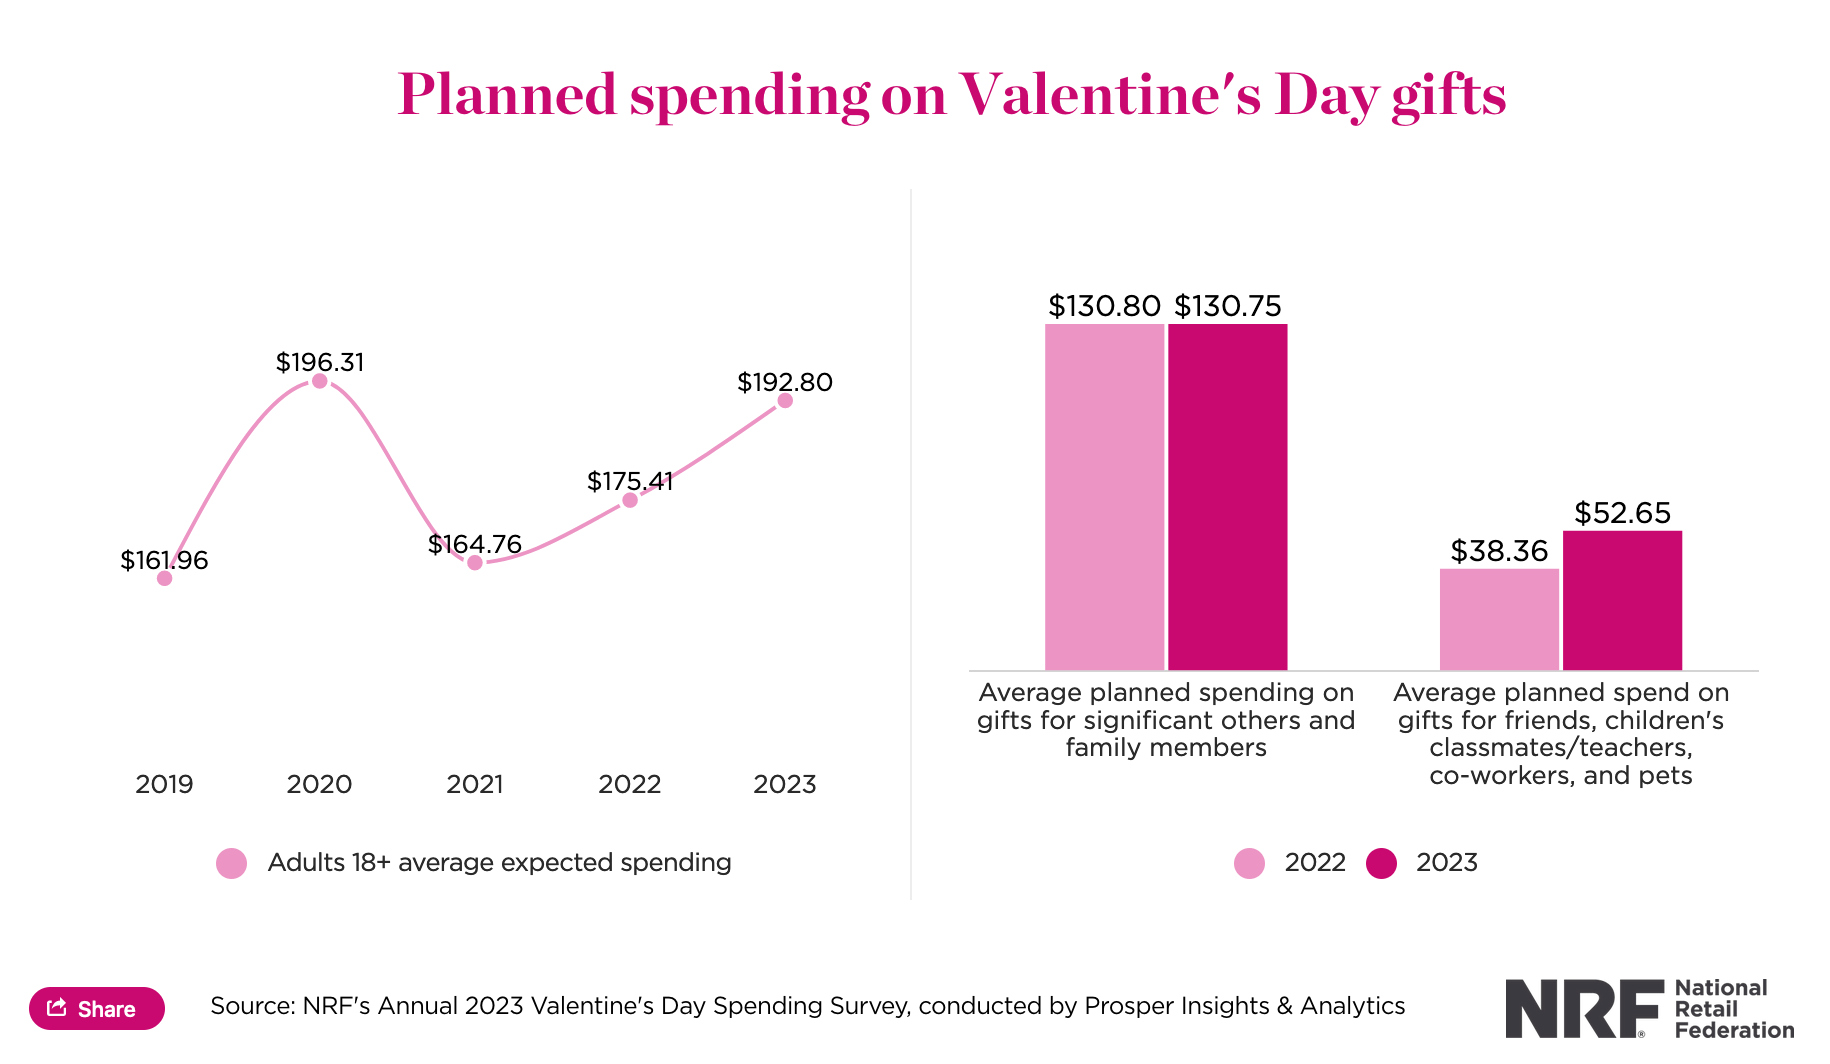 Valentine’s Day spending plans statistics showing a drop in spending in 2021 and a steady increase after